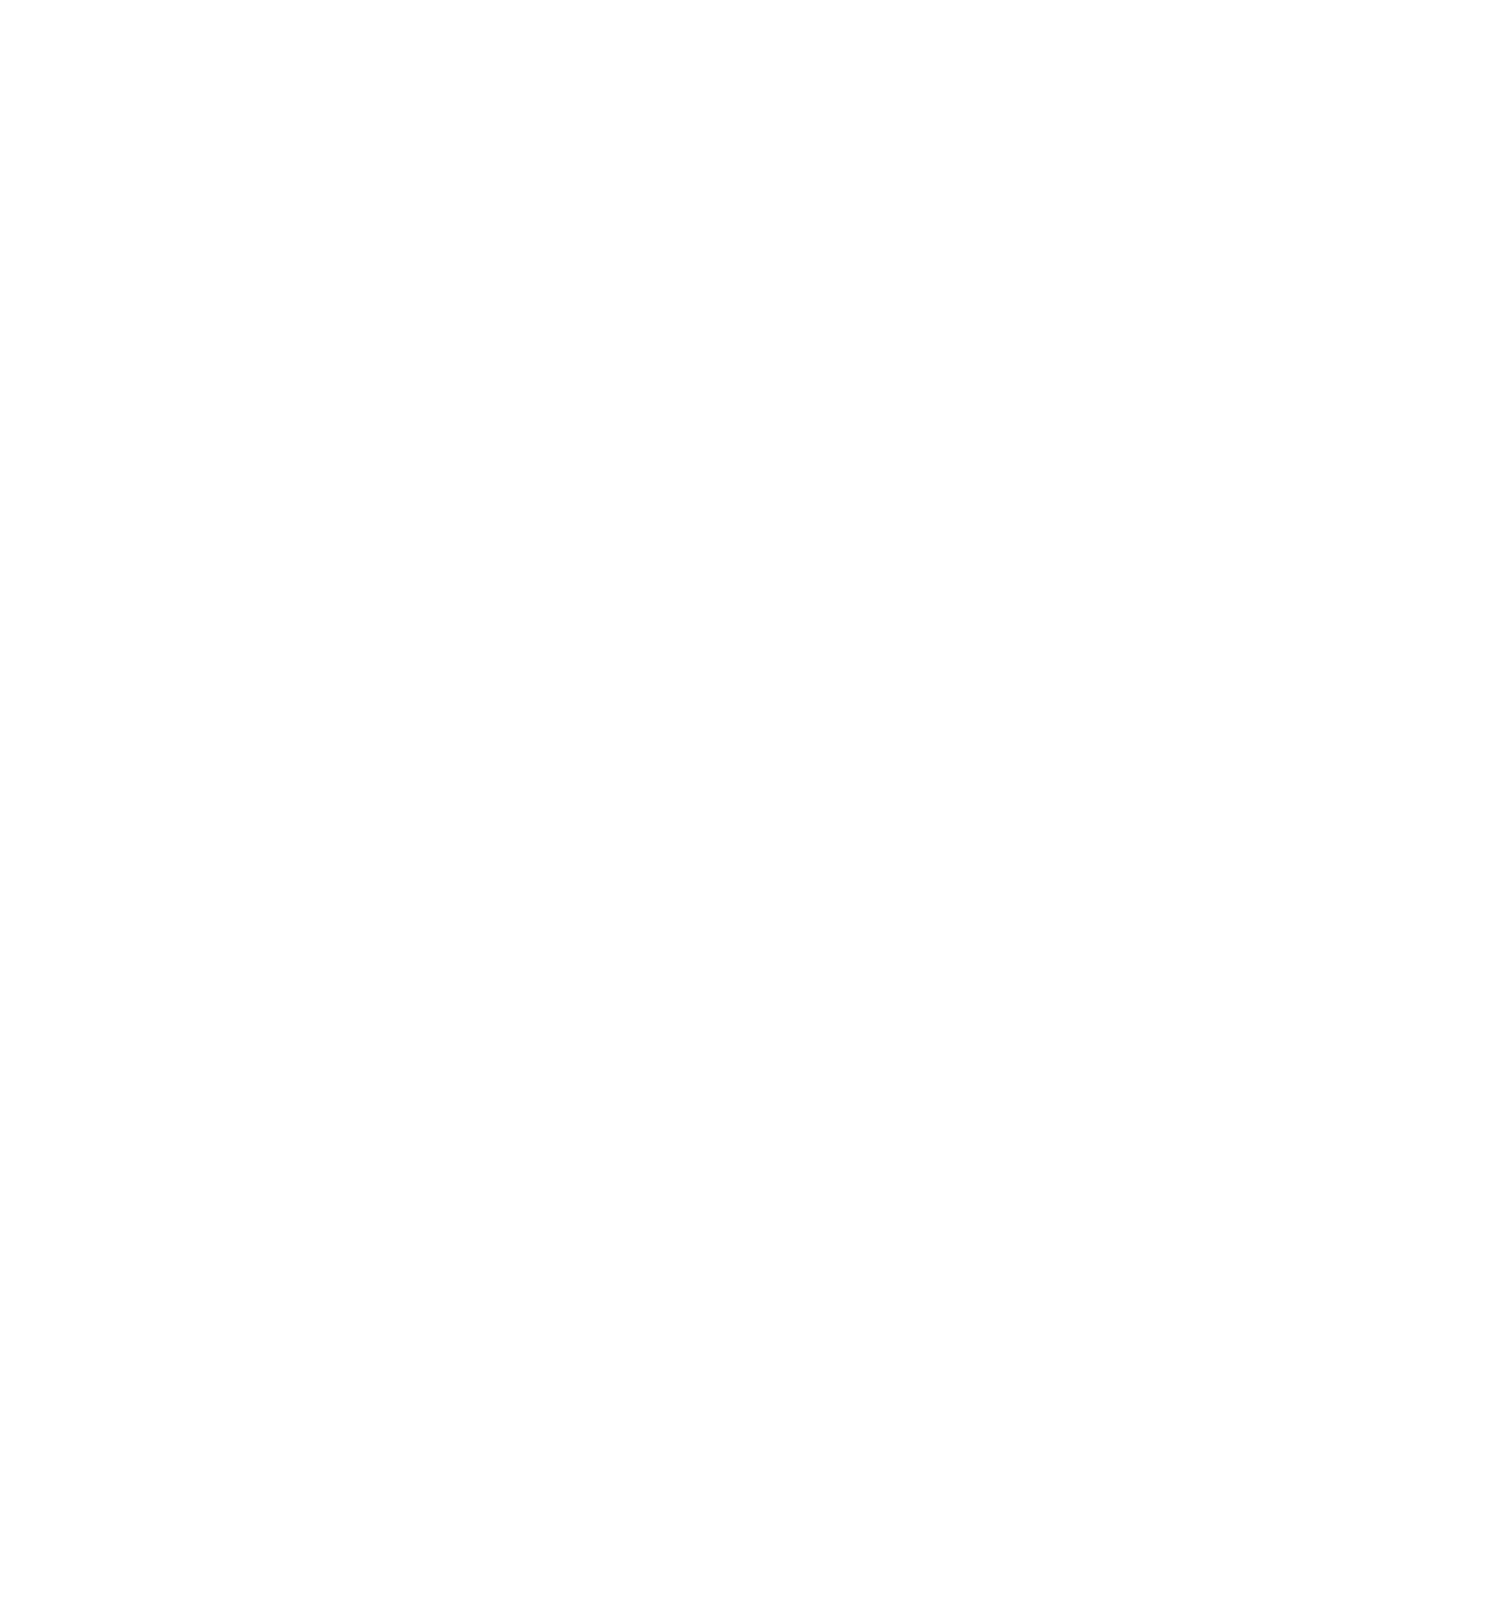 Sweatland Mobile Health and Recovery